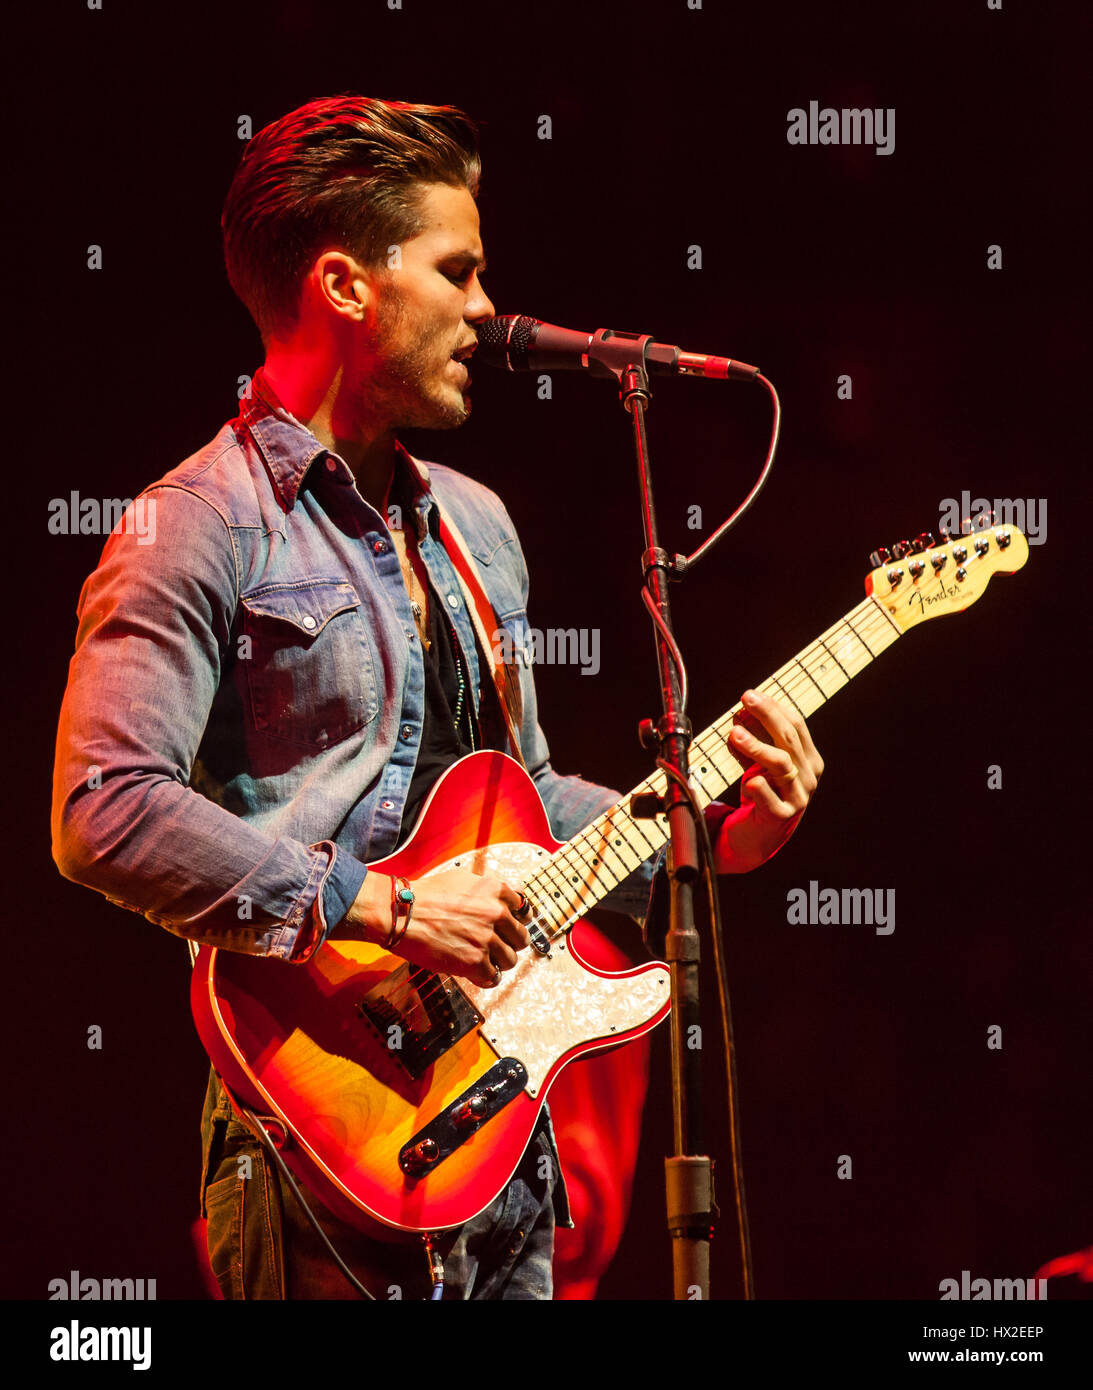 JJ Julius Son, lead singer of the Icelandic indie rock band Kaleo performs  in concert in London, Canada on March 22, 2017 Stock Photo - Alamy